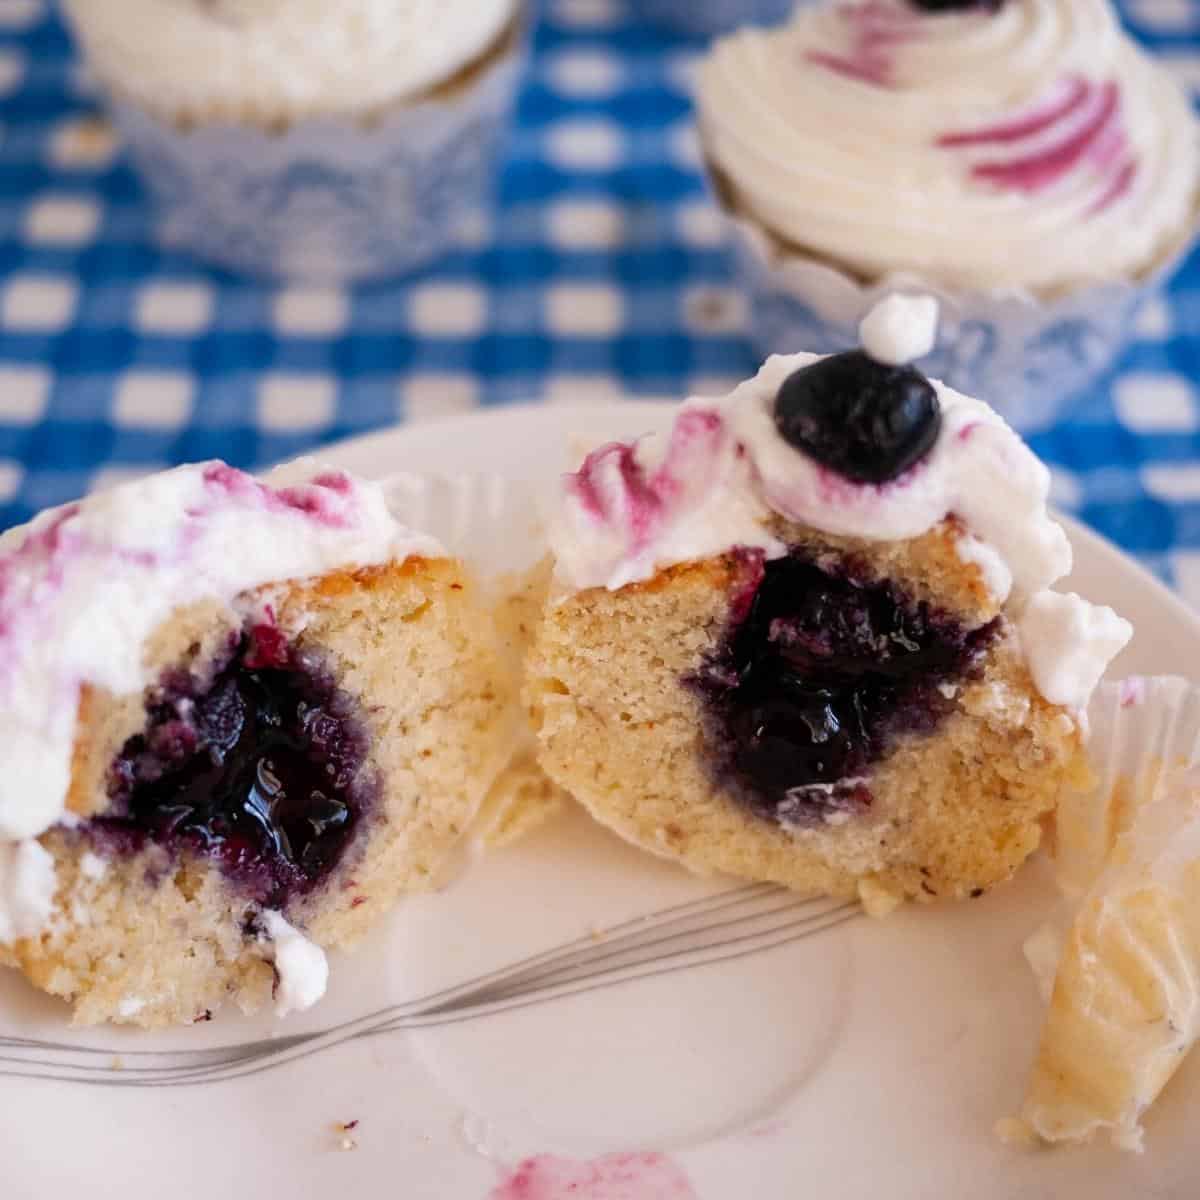 A frosted cupcake cut in half to show blueberry filling.